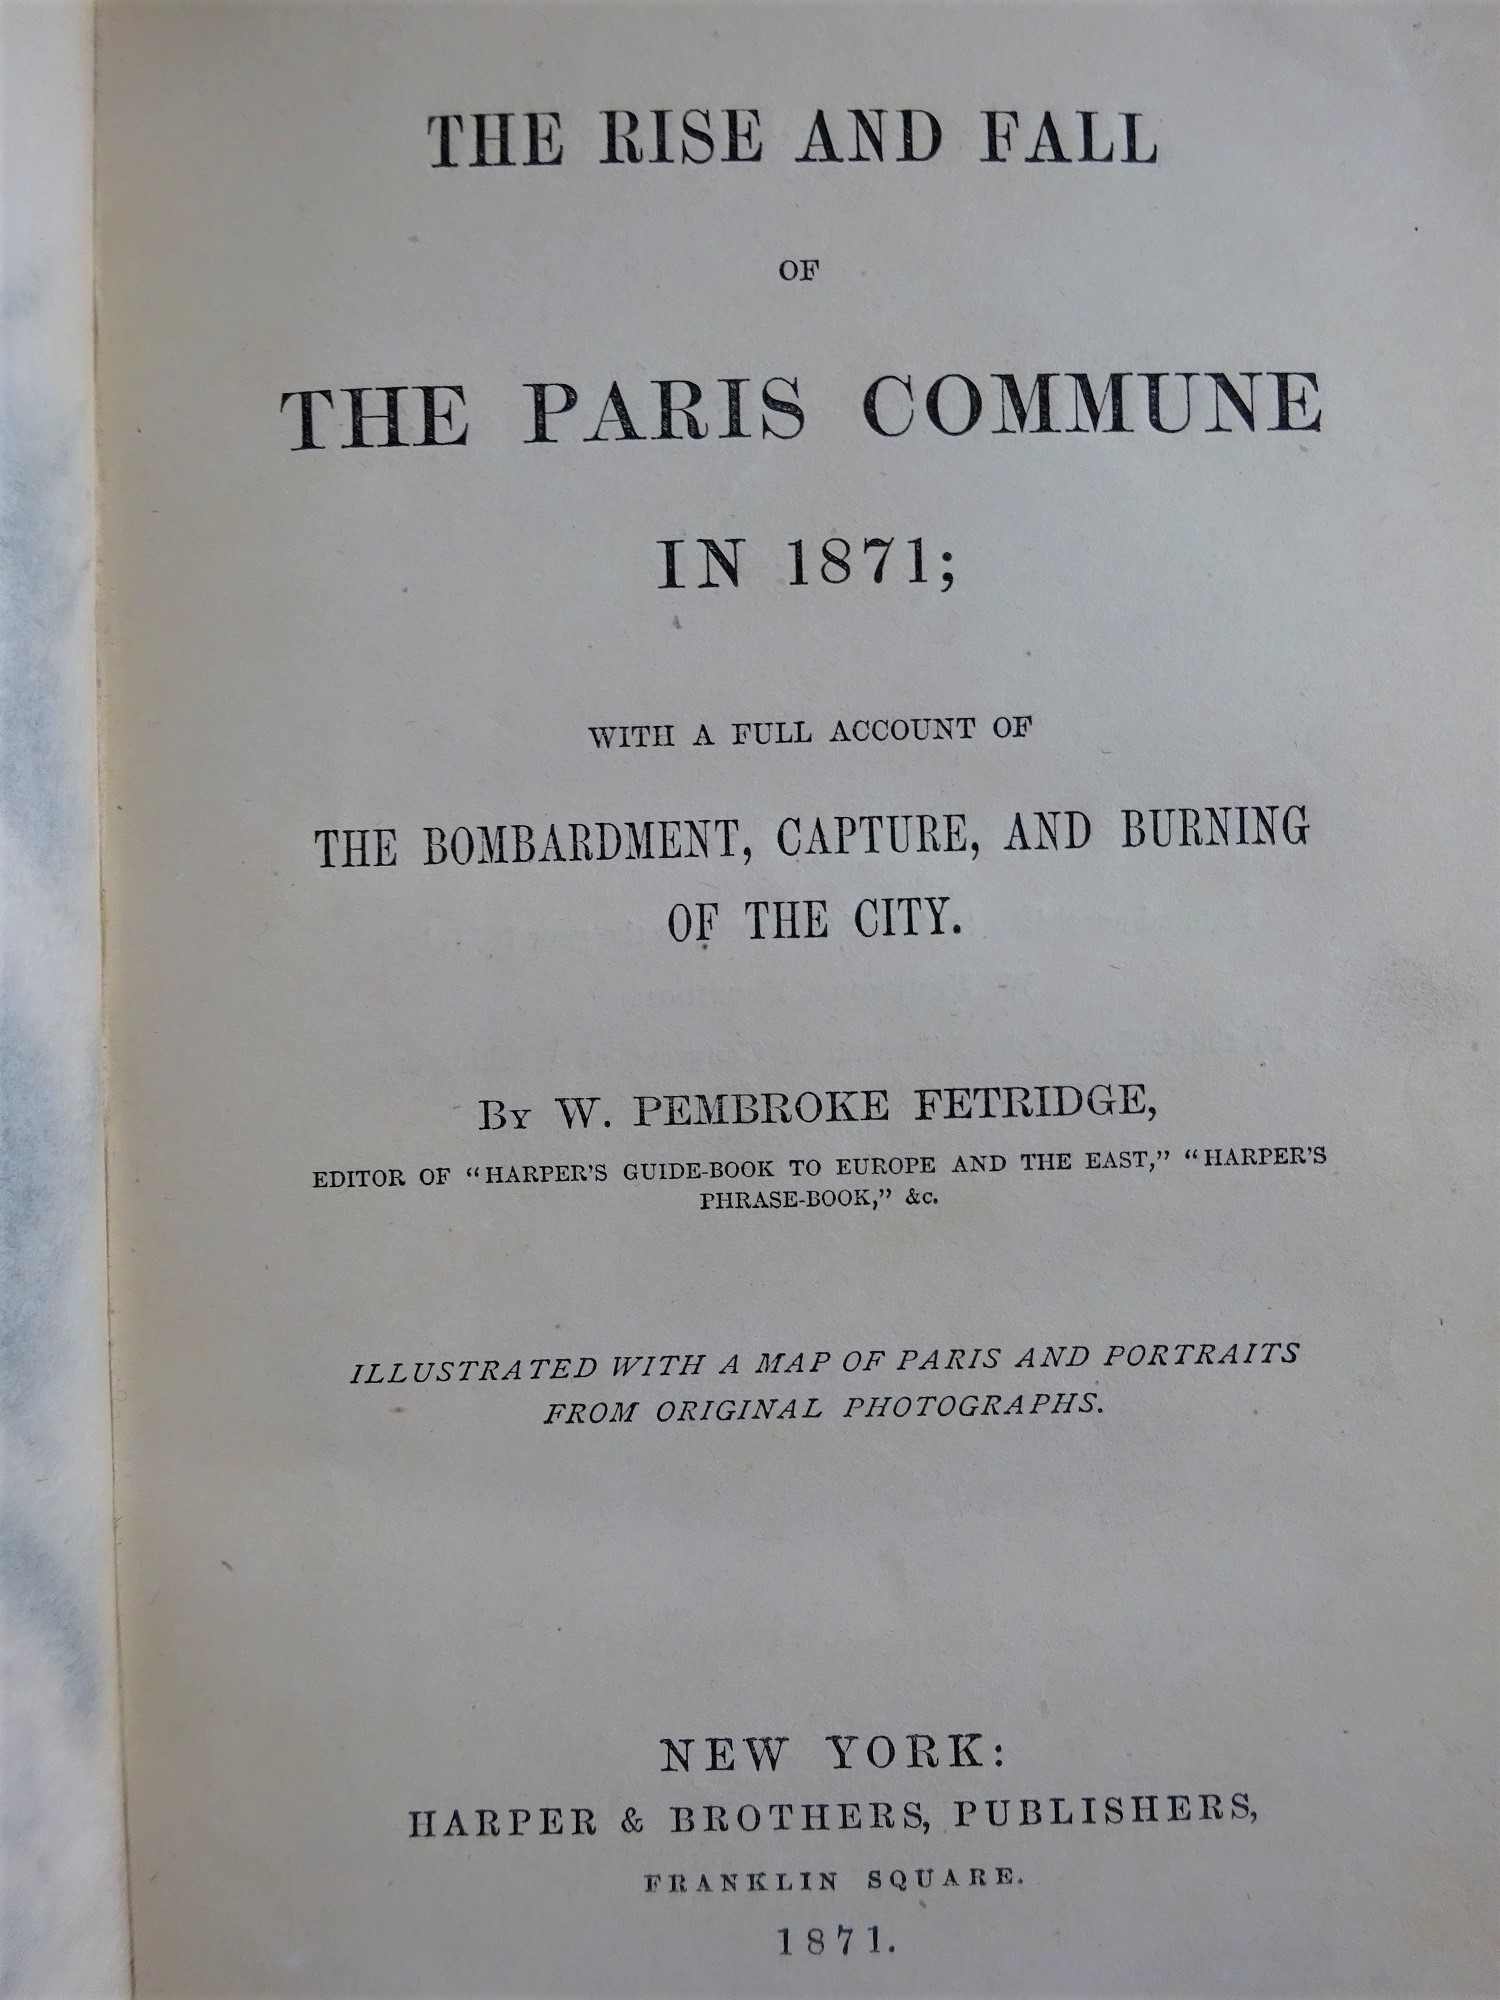 The rise and fall of  the Paris Commune in 1871